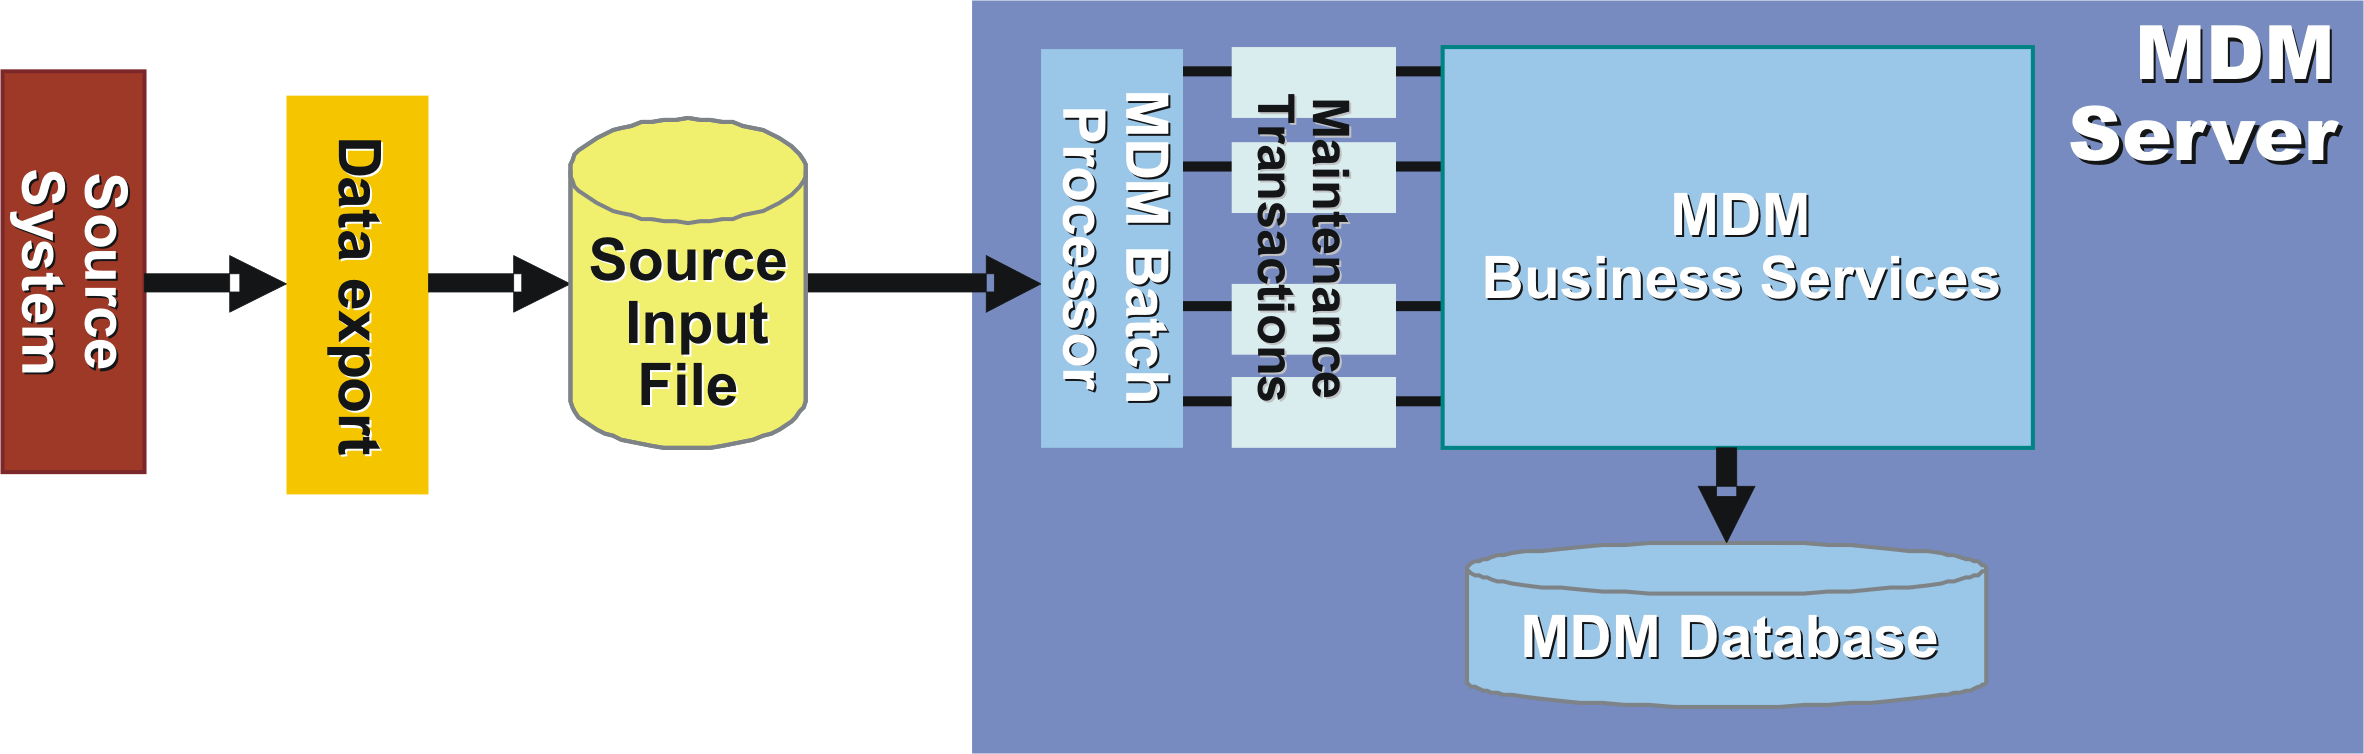 Visual representation of data being loaded into InfoSphere MDM